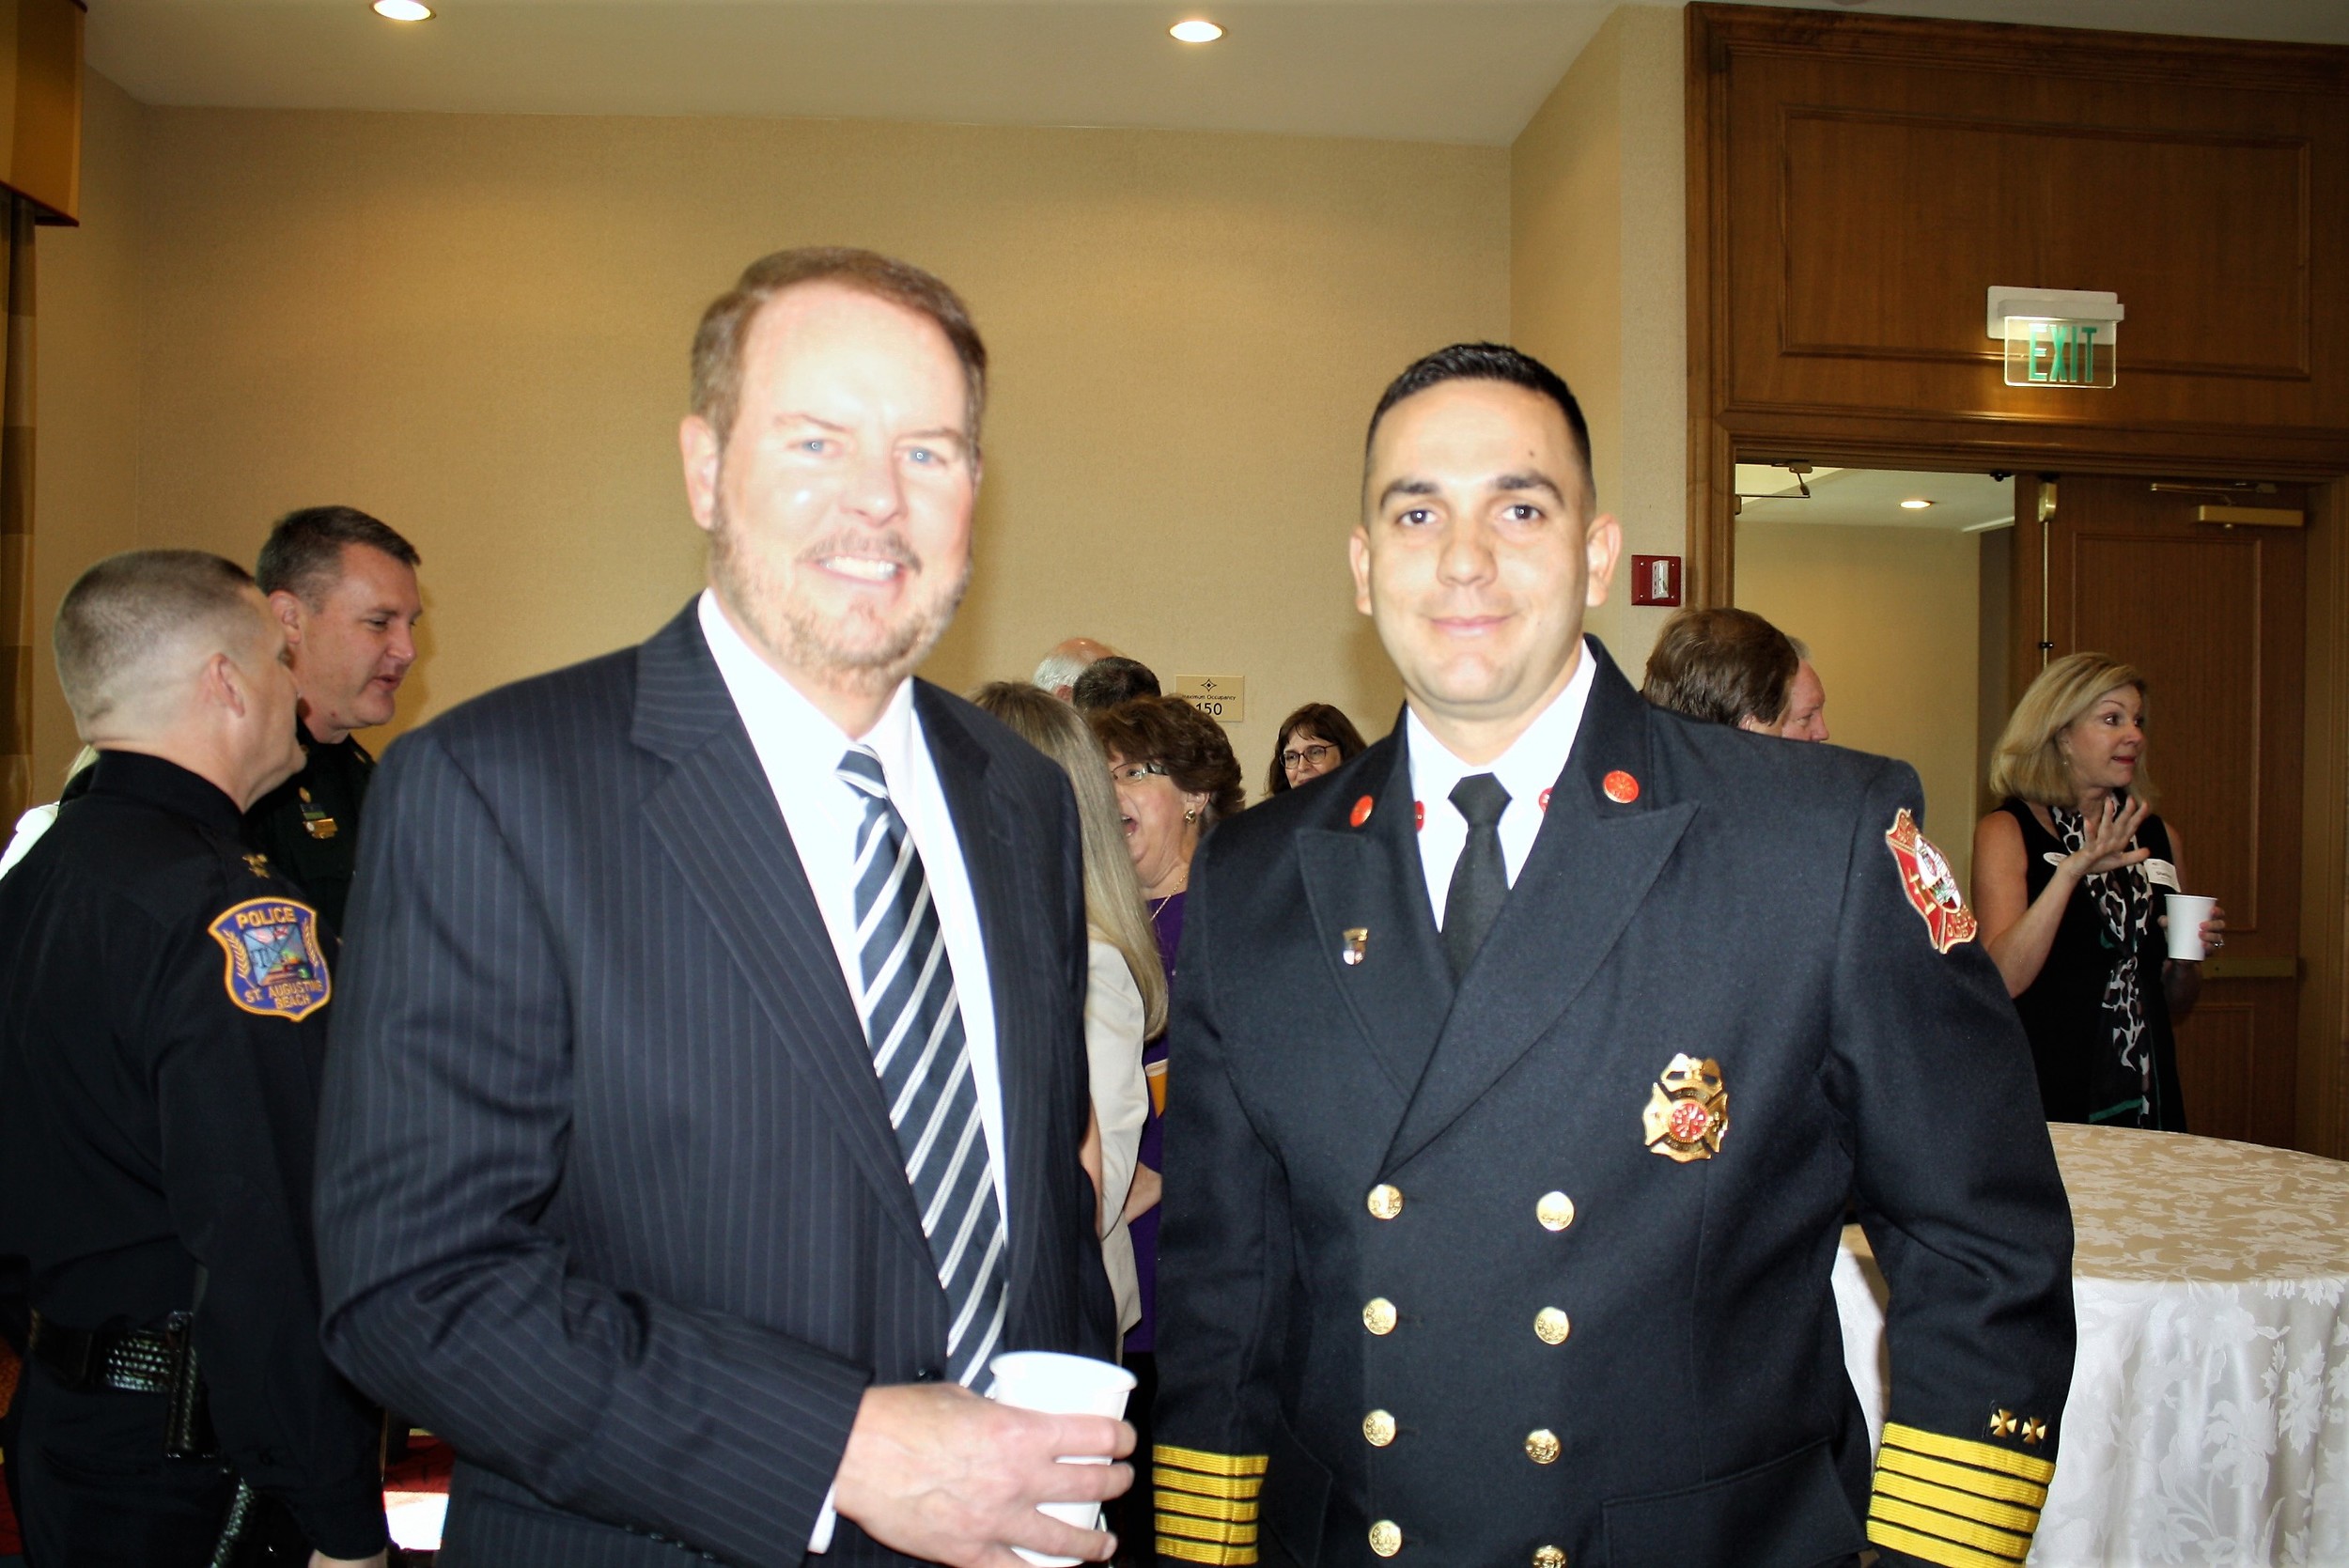 County Administrator Michael Wanchick and St. Augustine Fire Chief Carlos Aviles